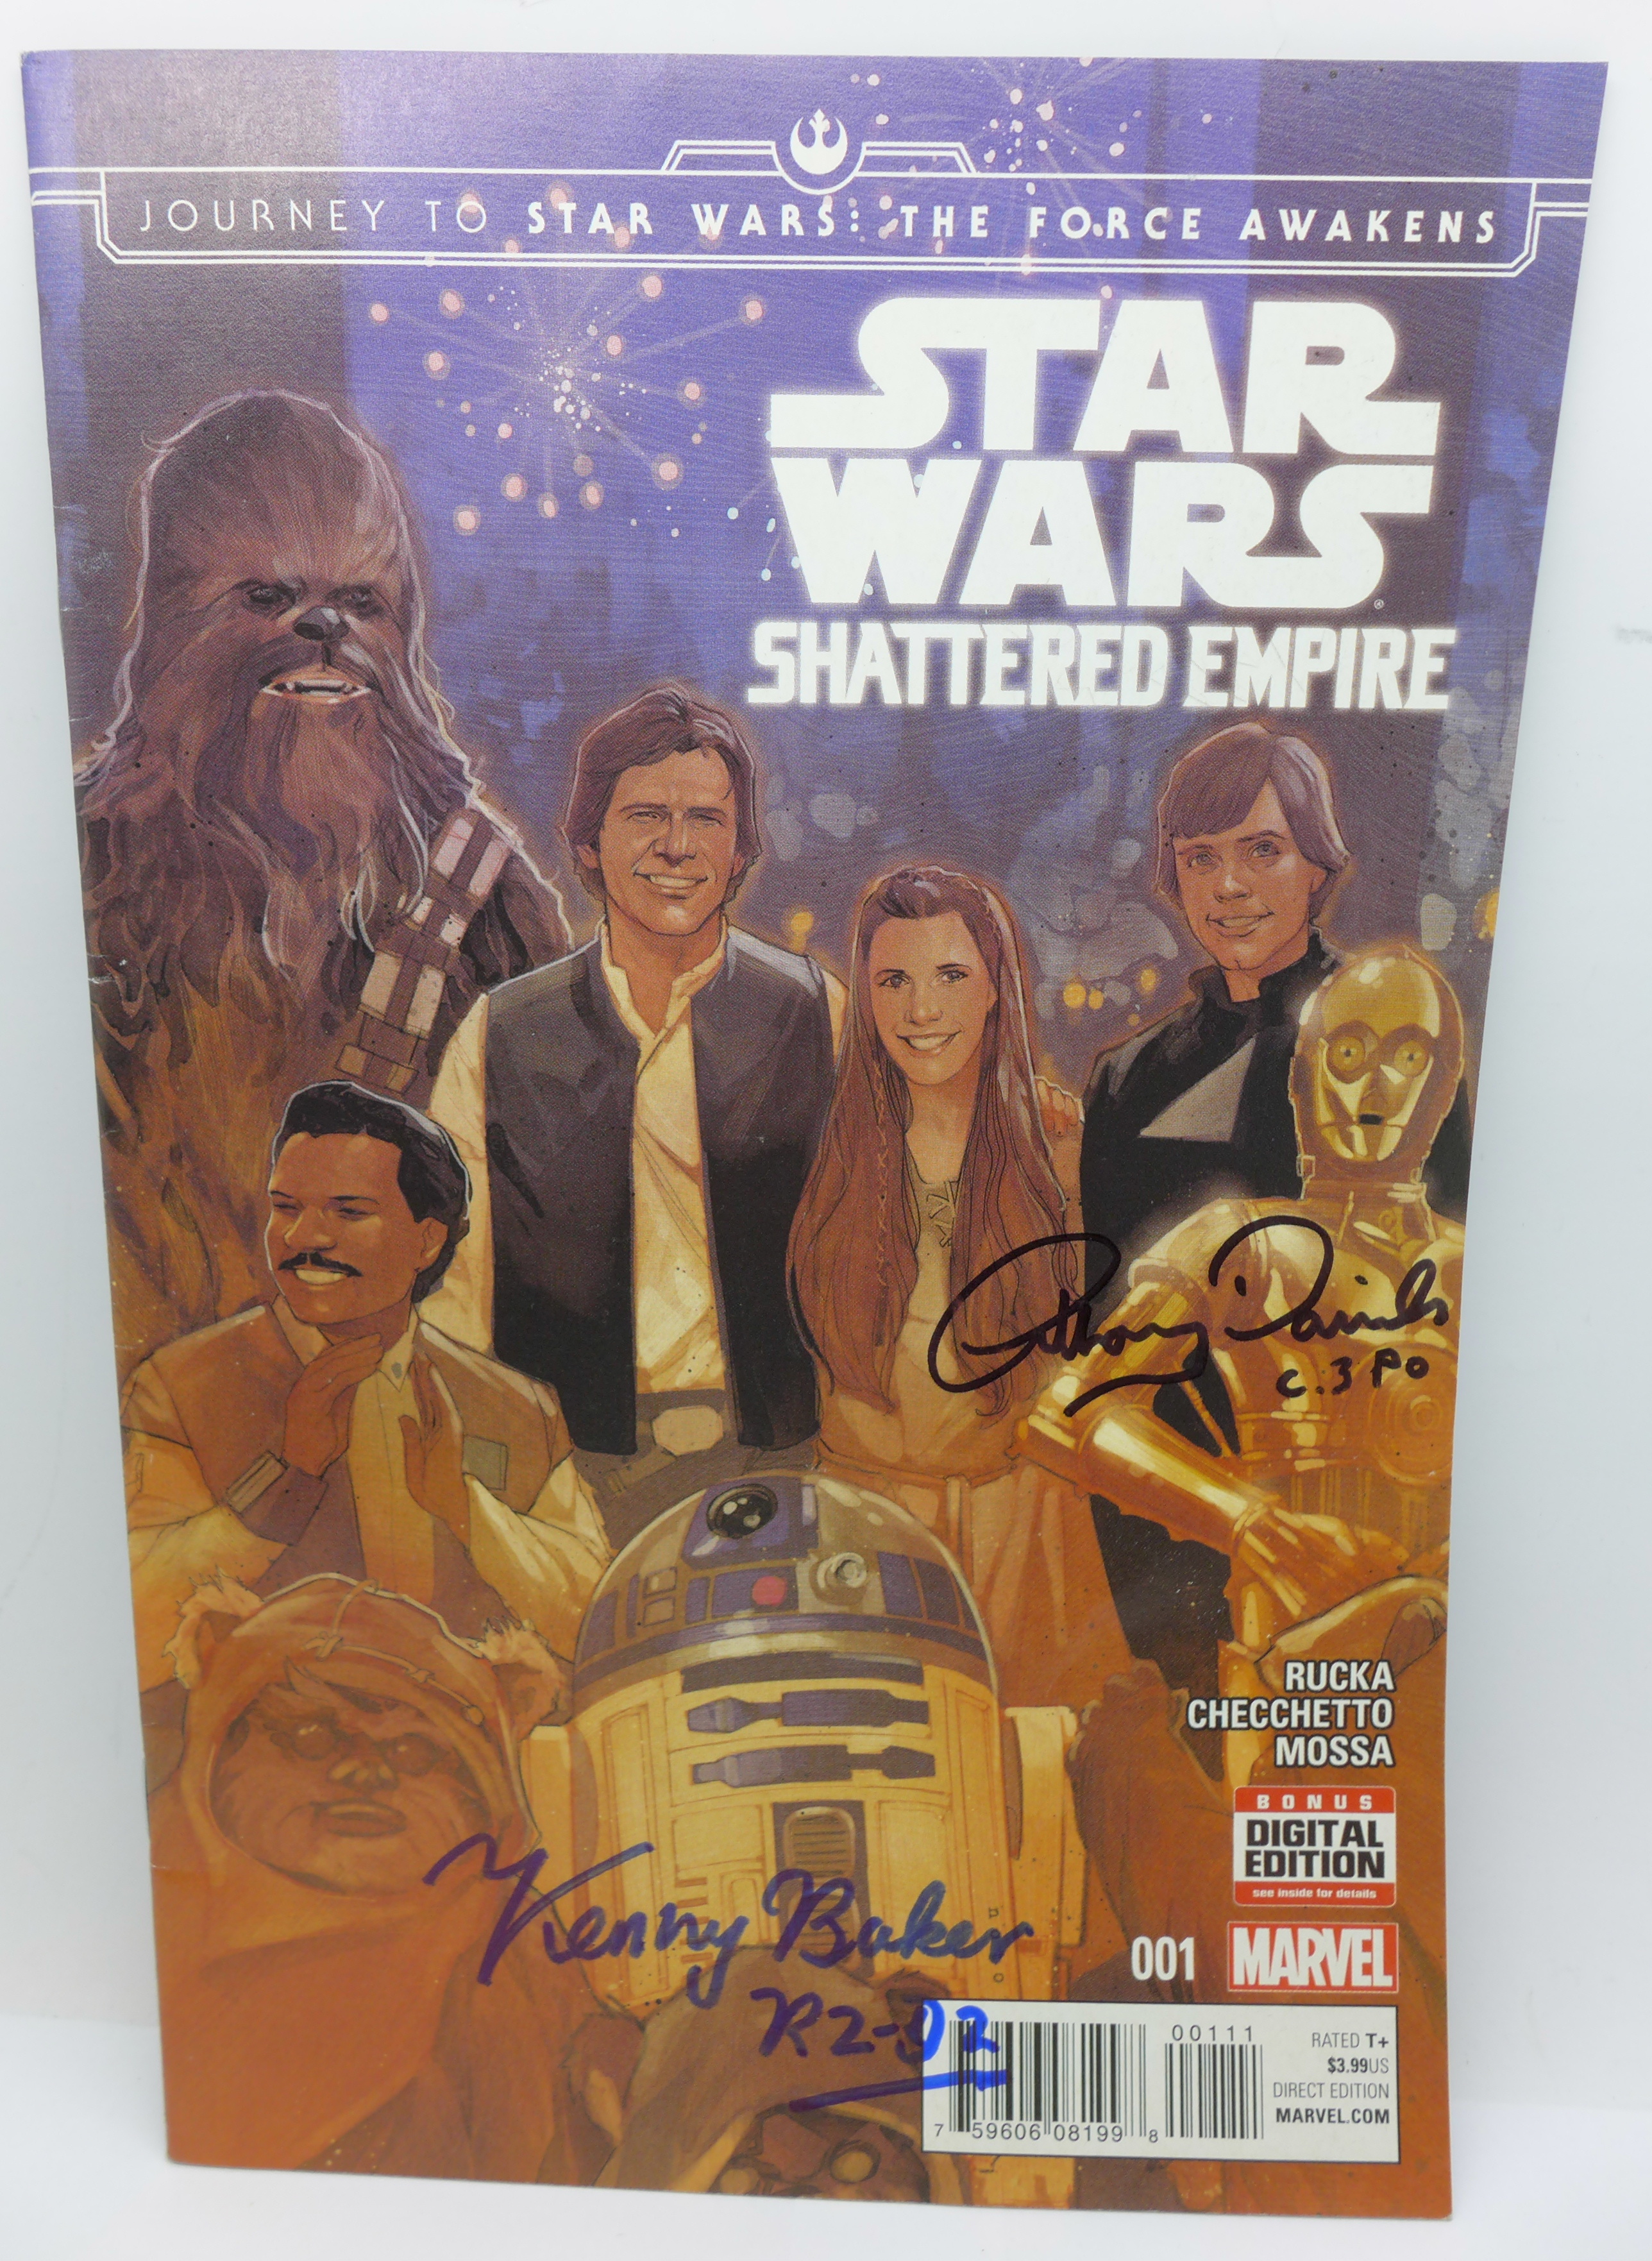 A Star Wars comic signed by Kenny Baker (R2D2) and Anthony Daniels (C3PO)